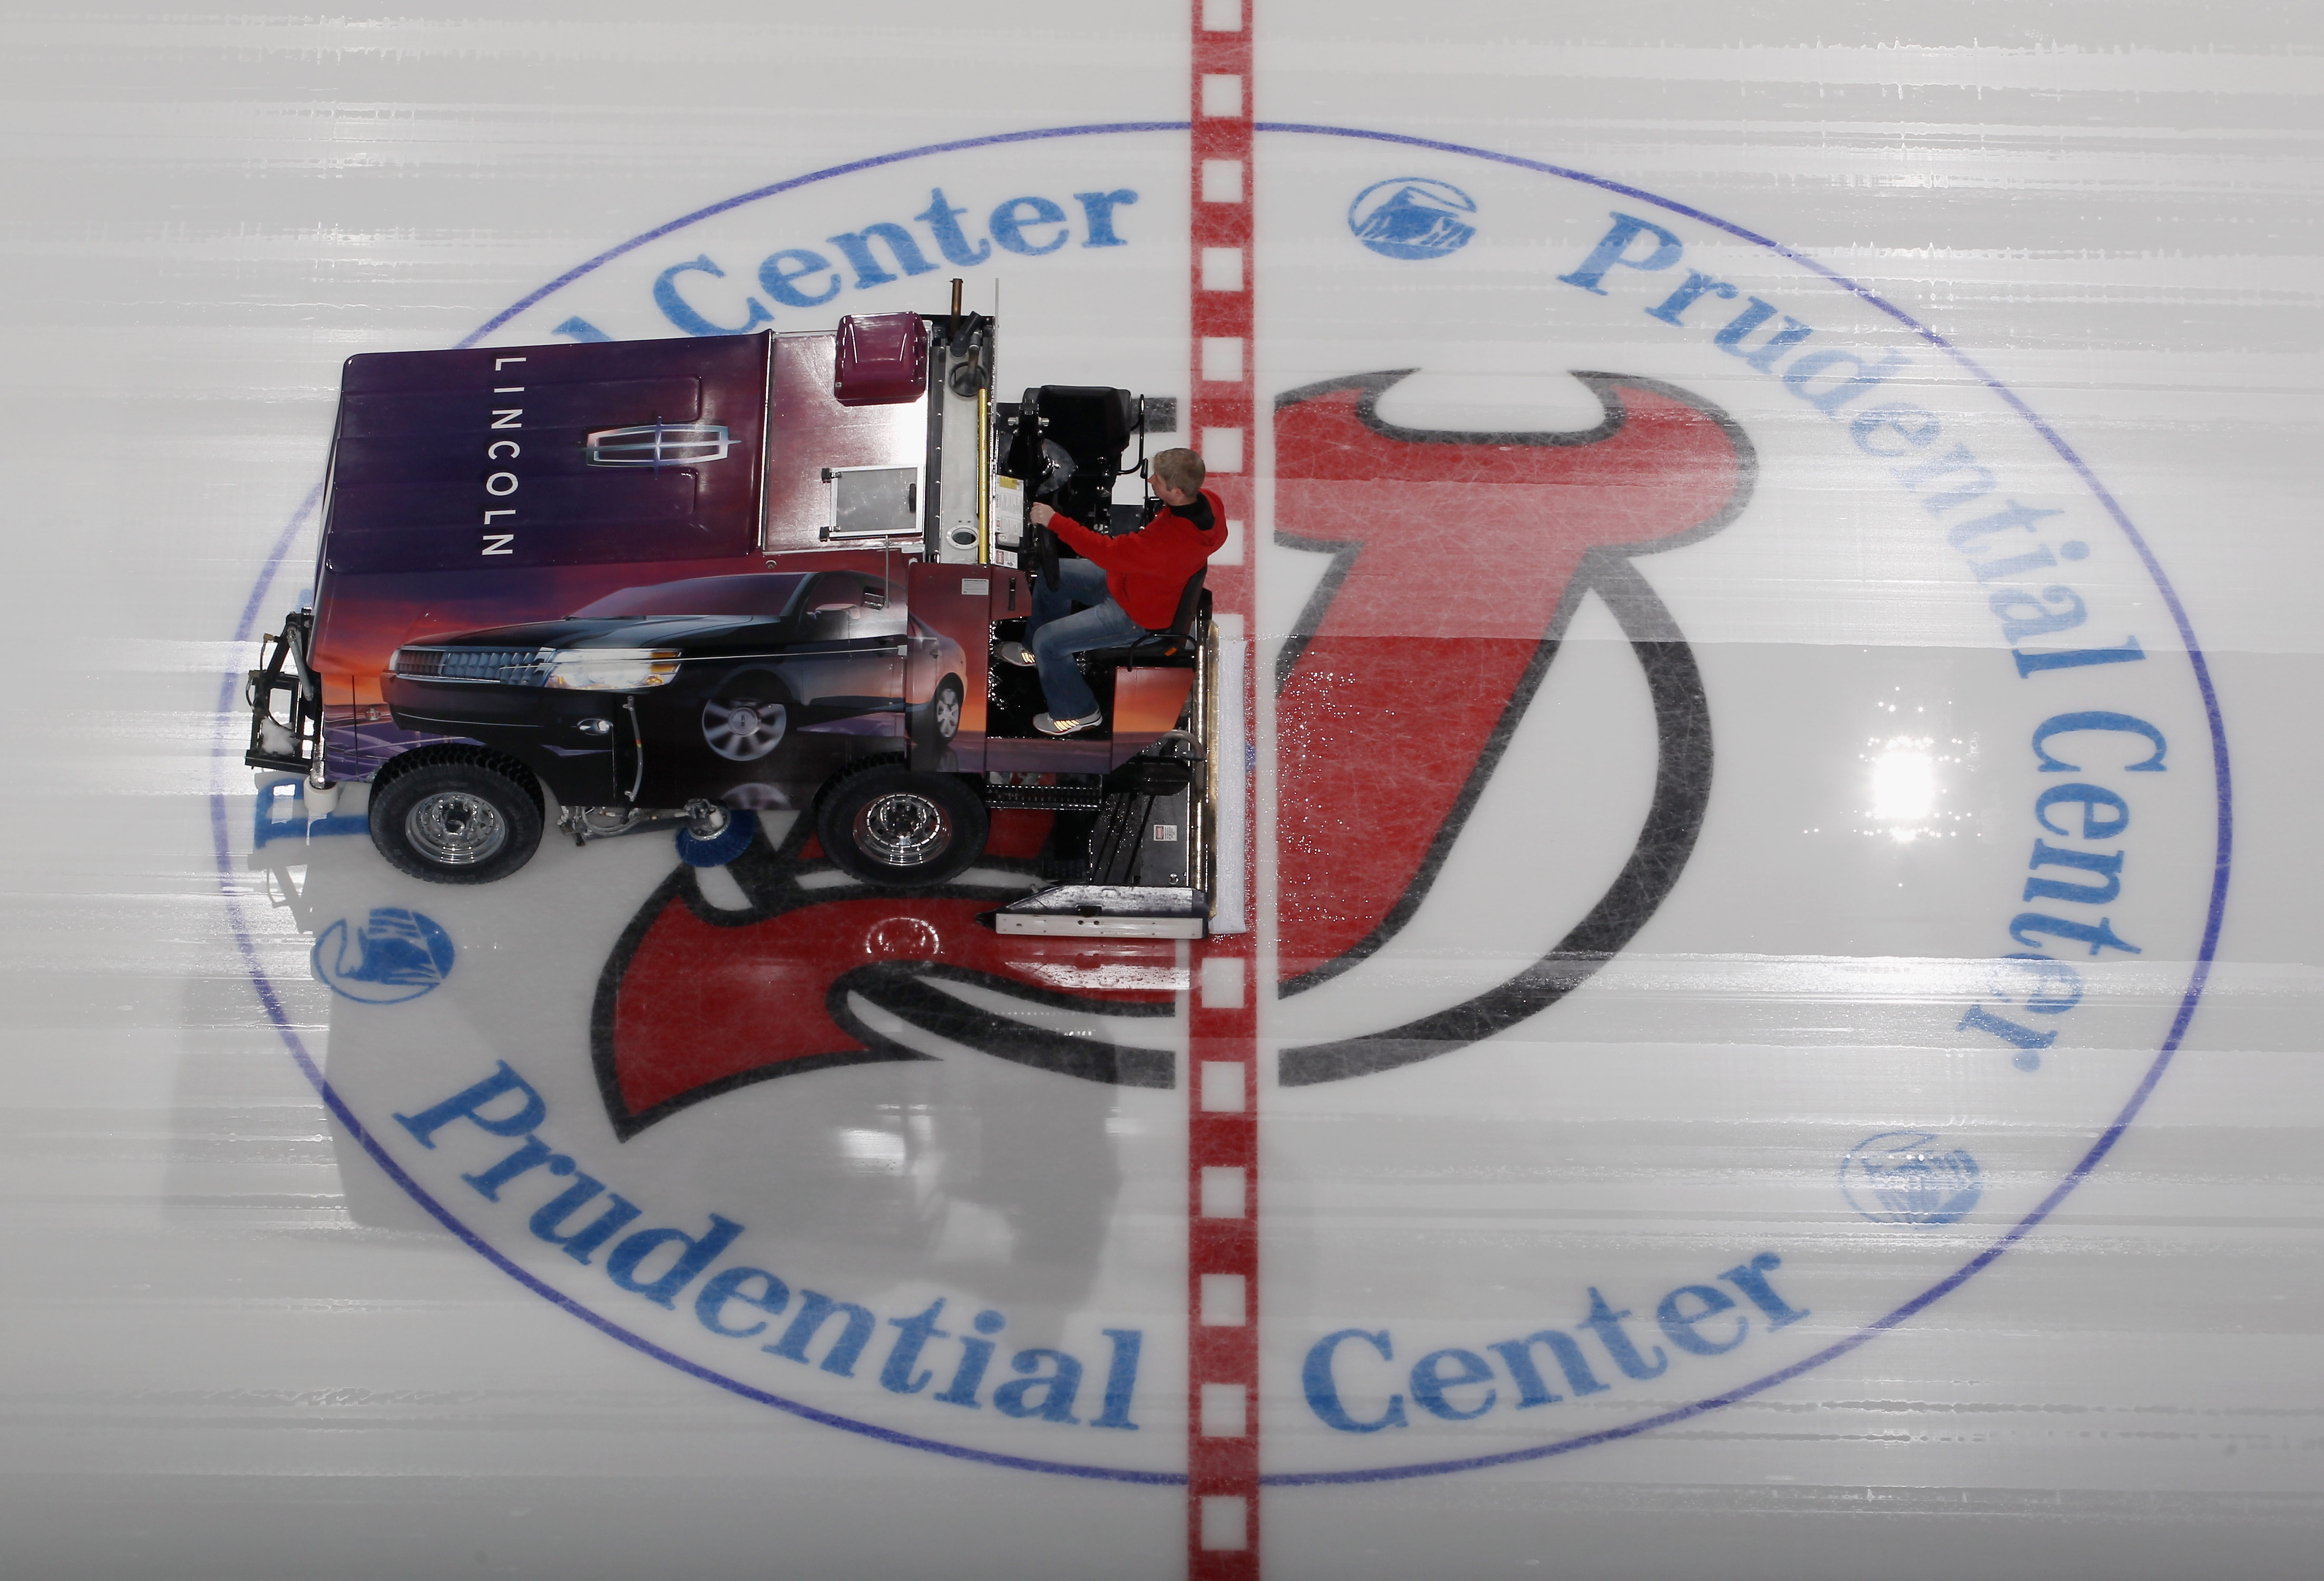 Prudential Center Reopening; NJ Devils 'Focused On Safety